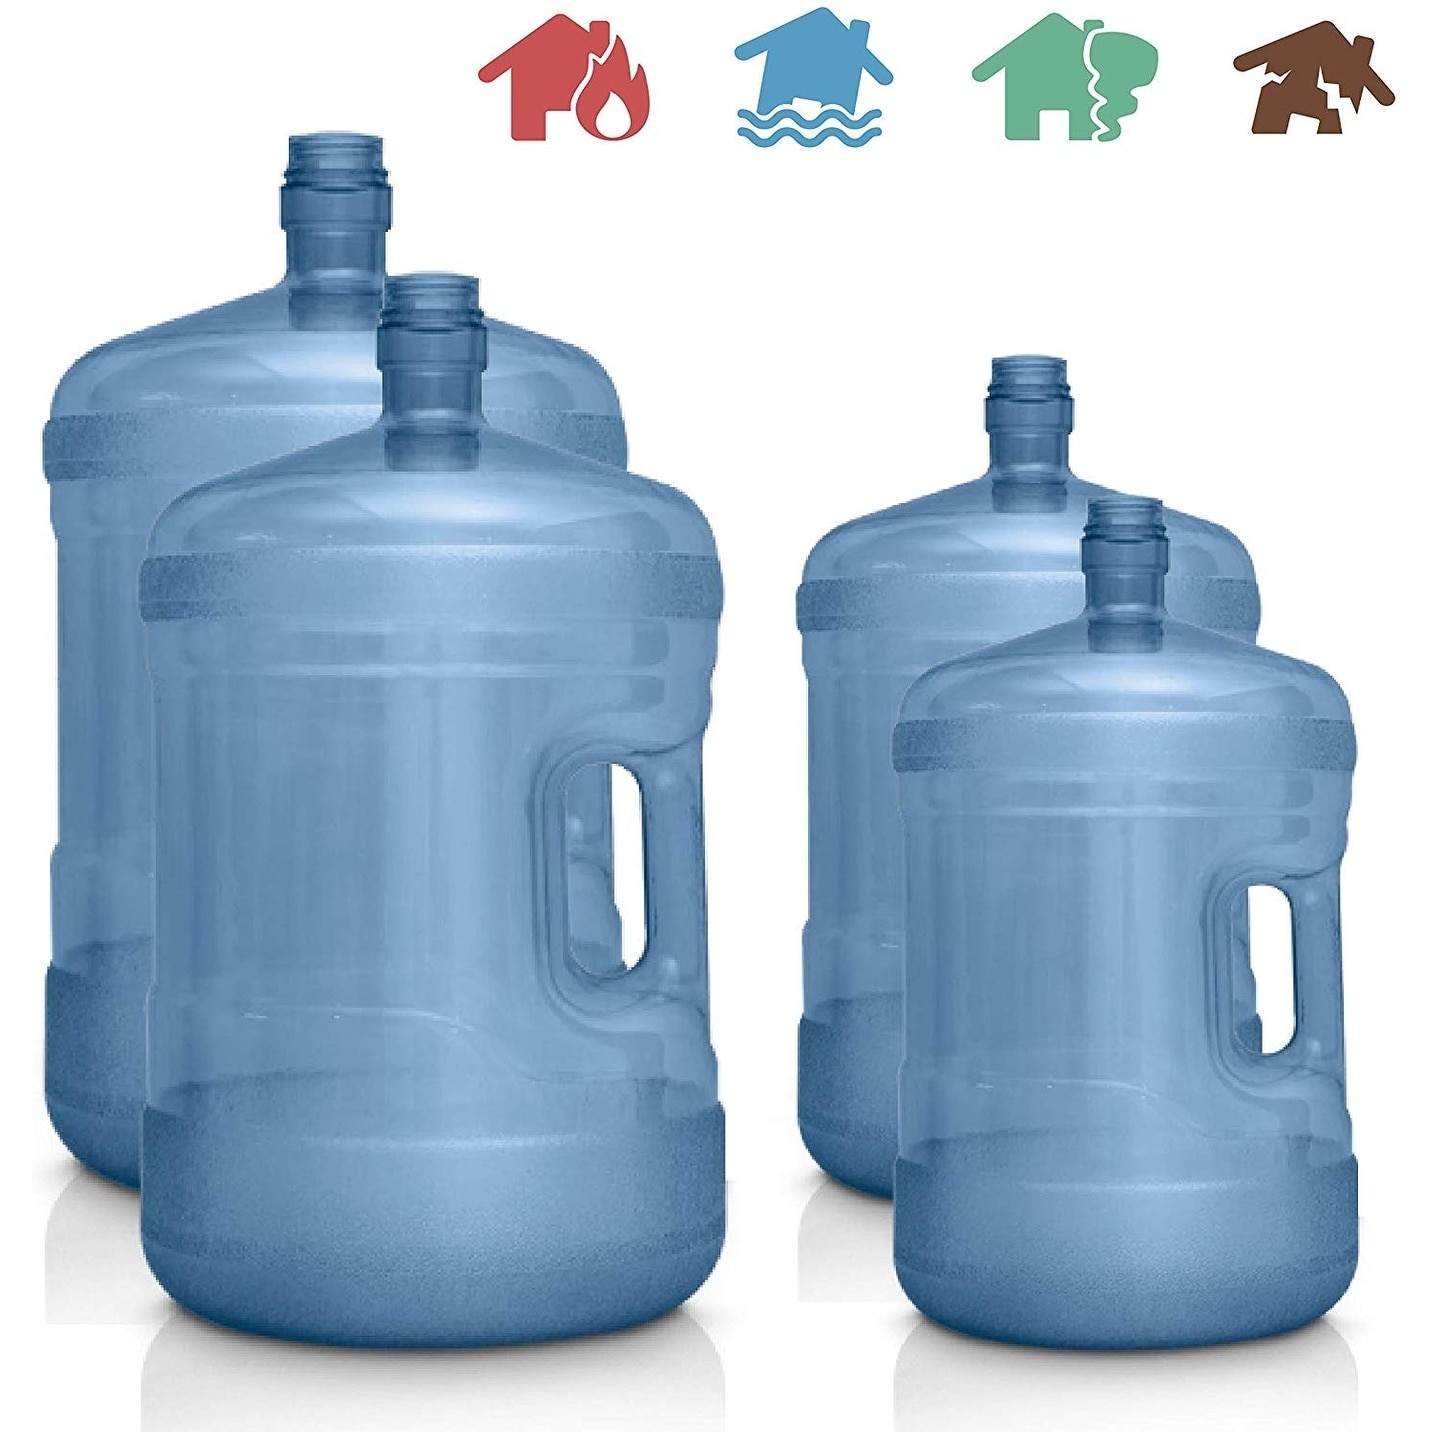 5 Gallon Water Bottle Bpa Free Screw On Cap Plastic Jug Container Free Ship...